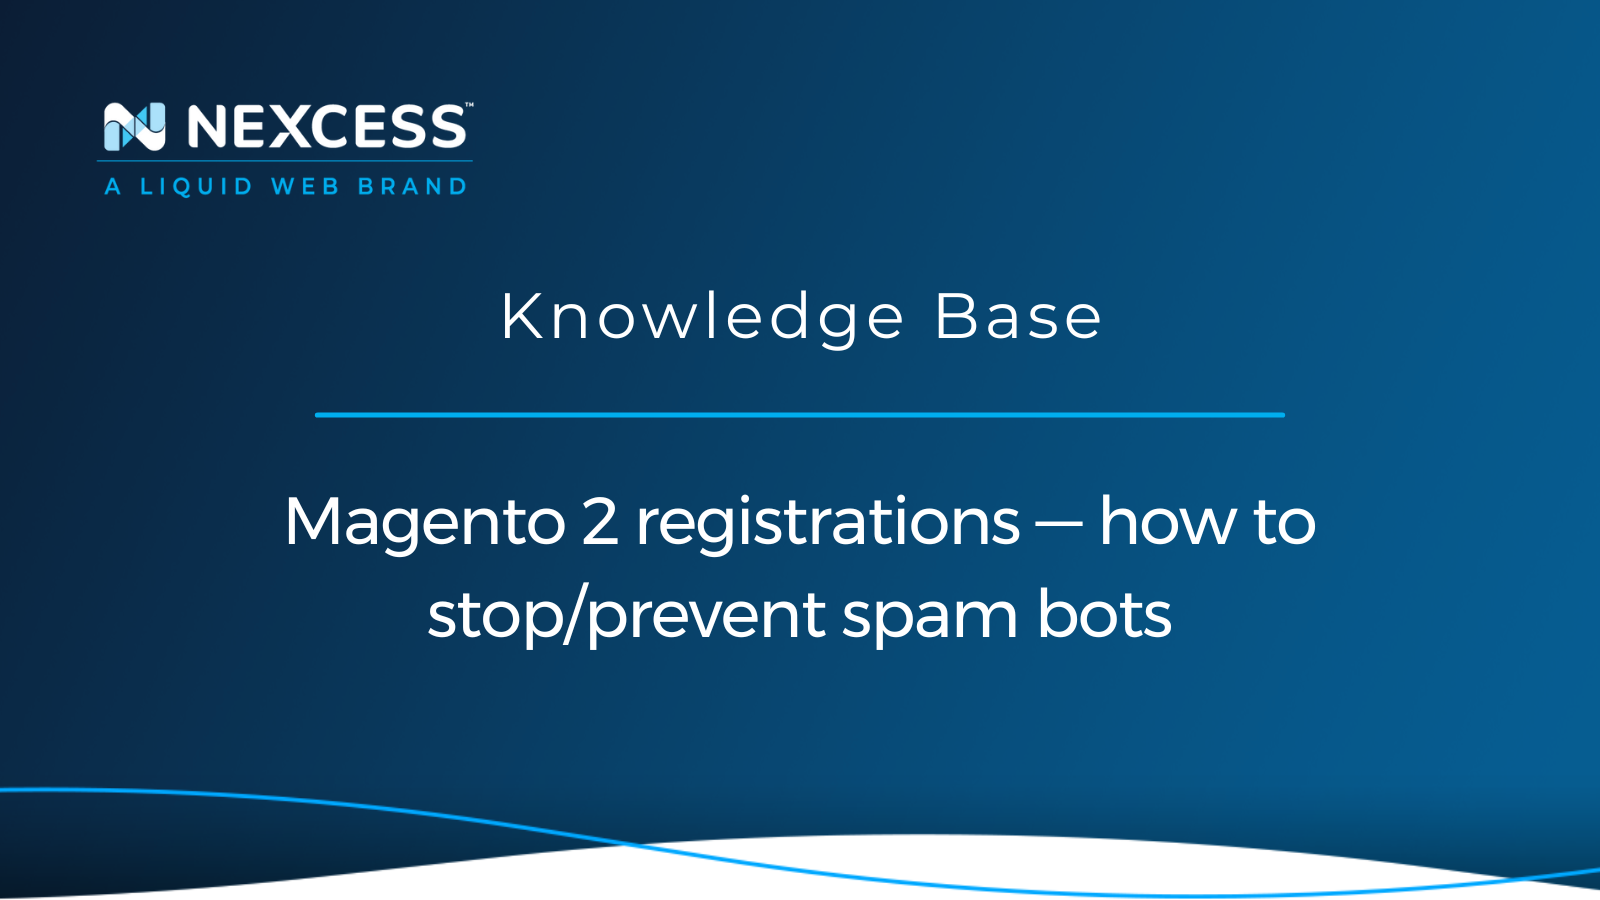 Magento 2 registrations — how to stop/prevent spam bots